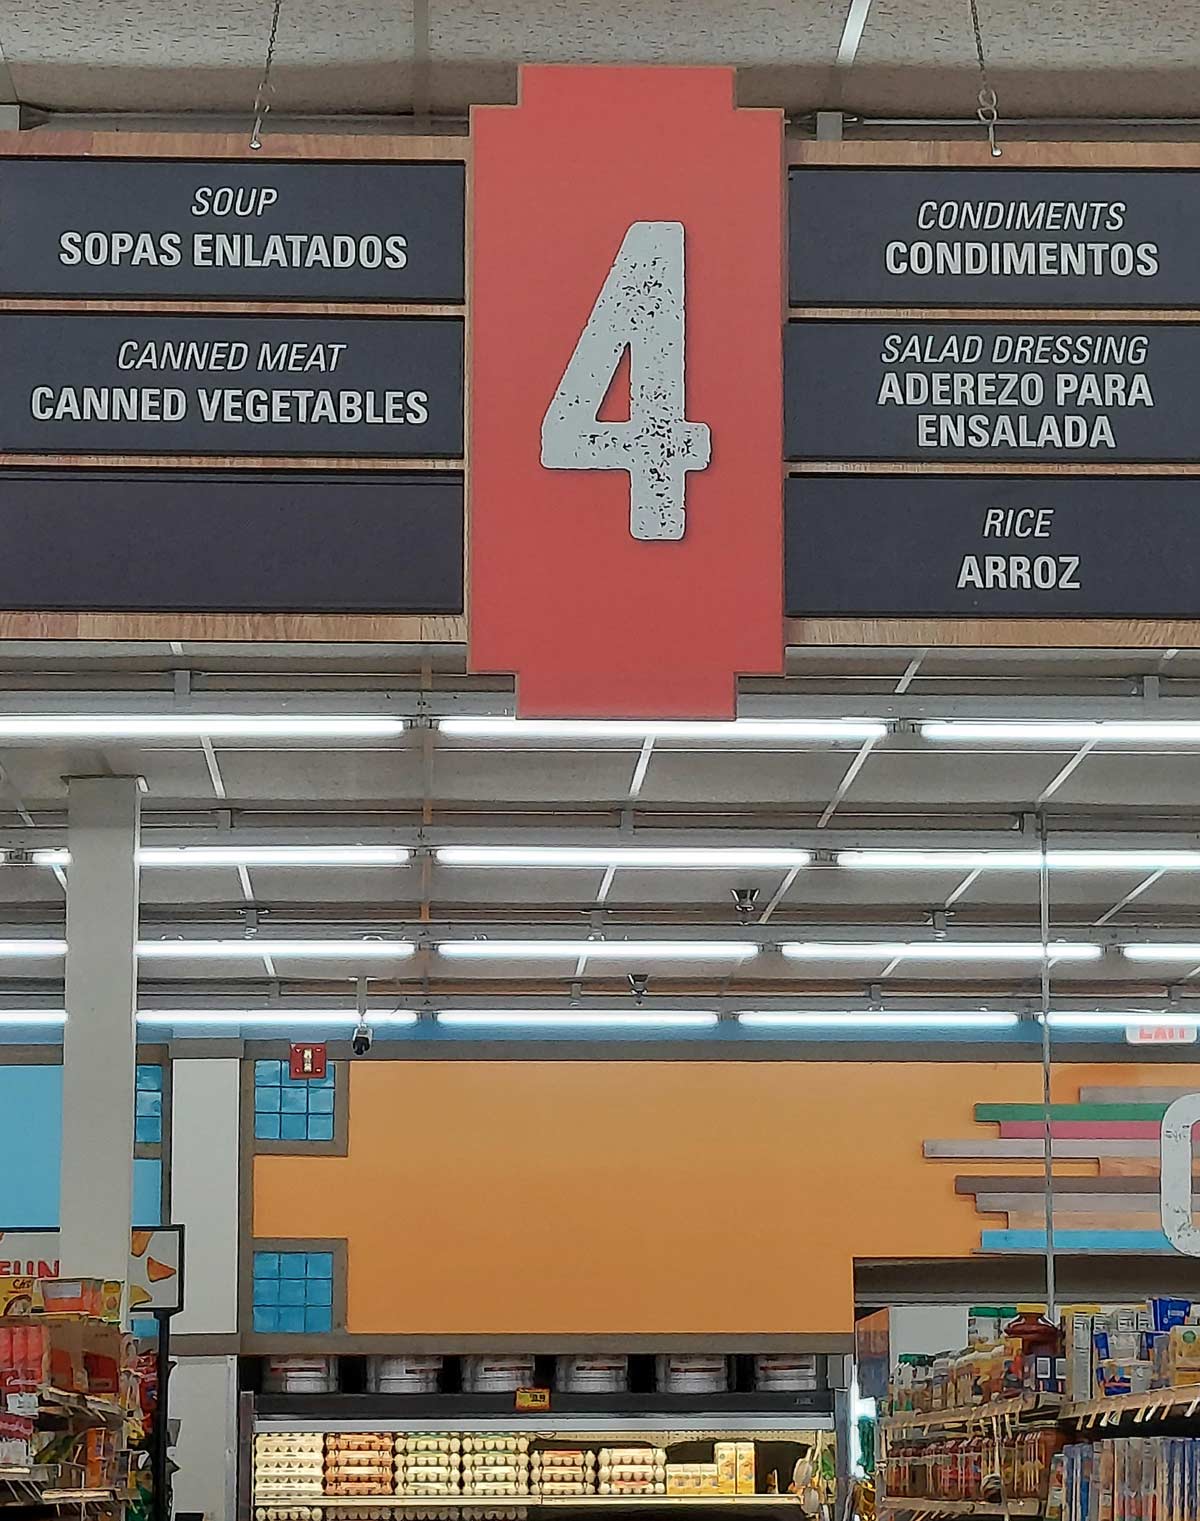 Apparently, the Spanish translation for "Canned meat" is "Canned vegetables"